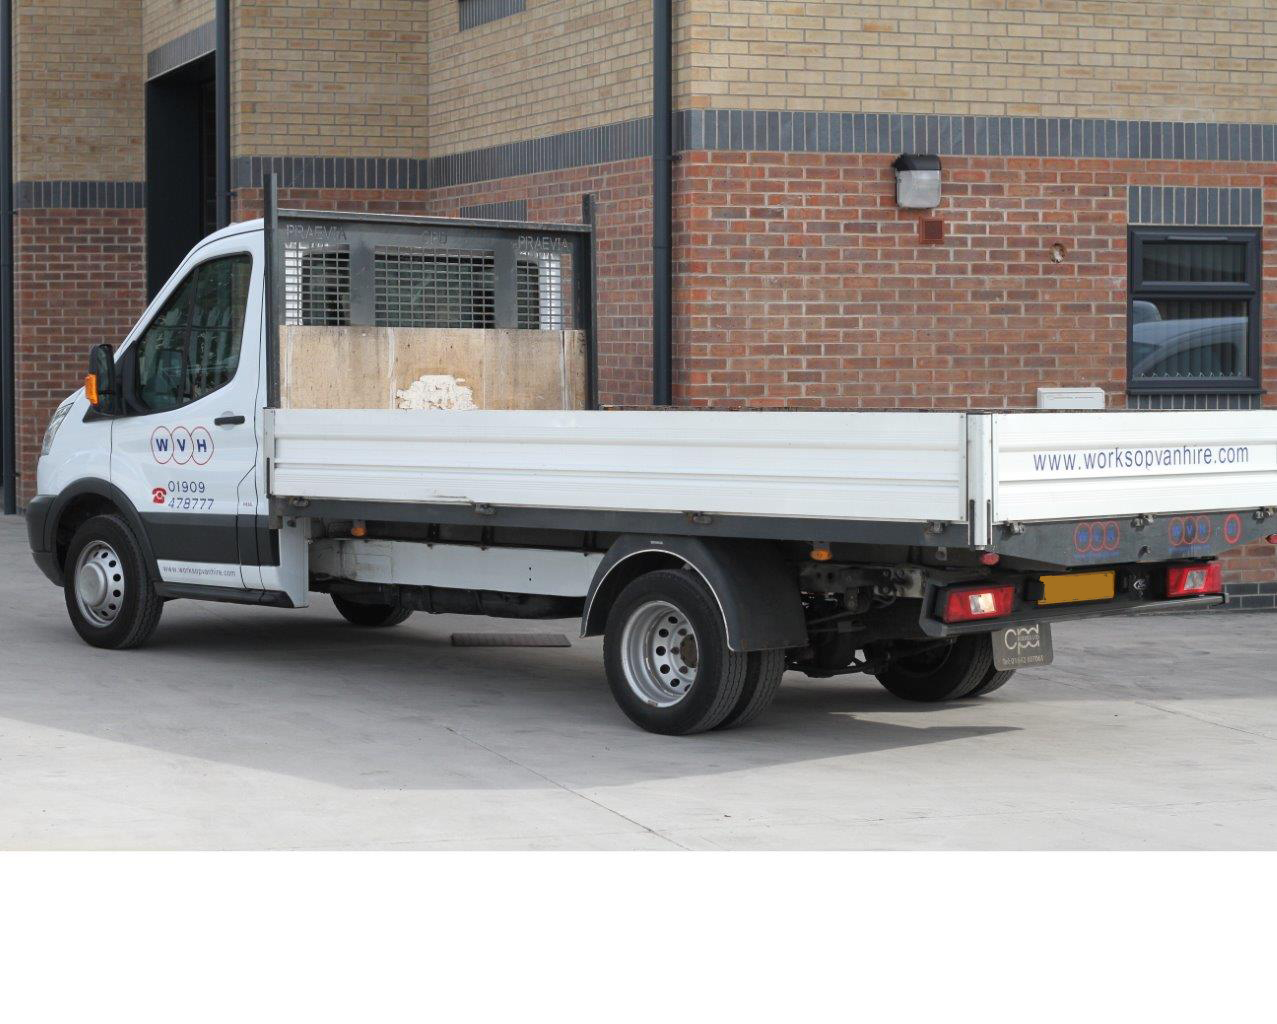 Flat bed trucks for hire in Worksop